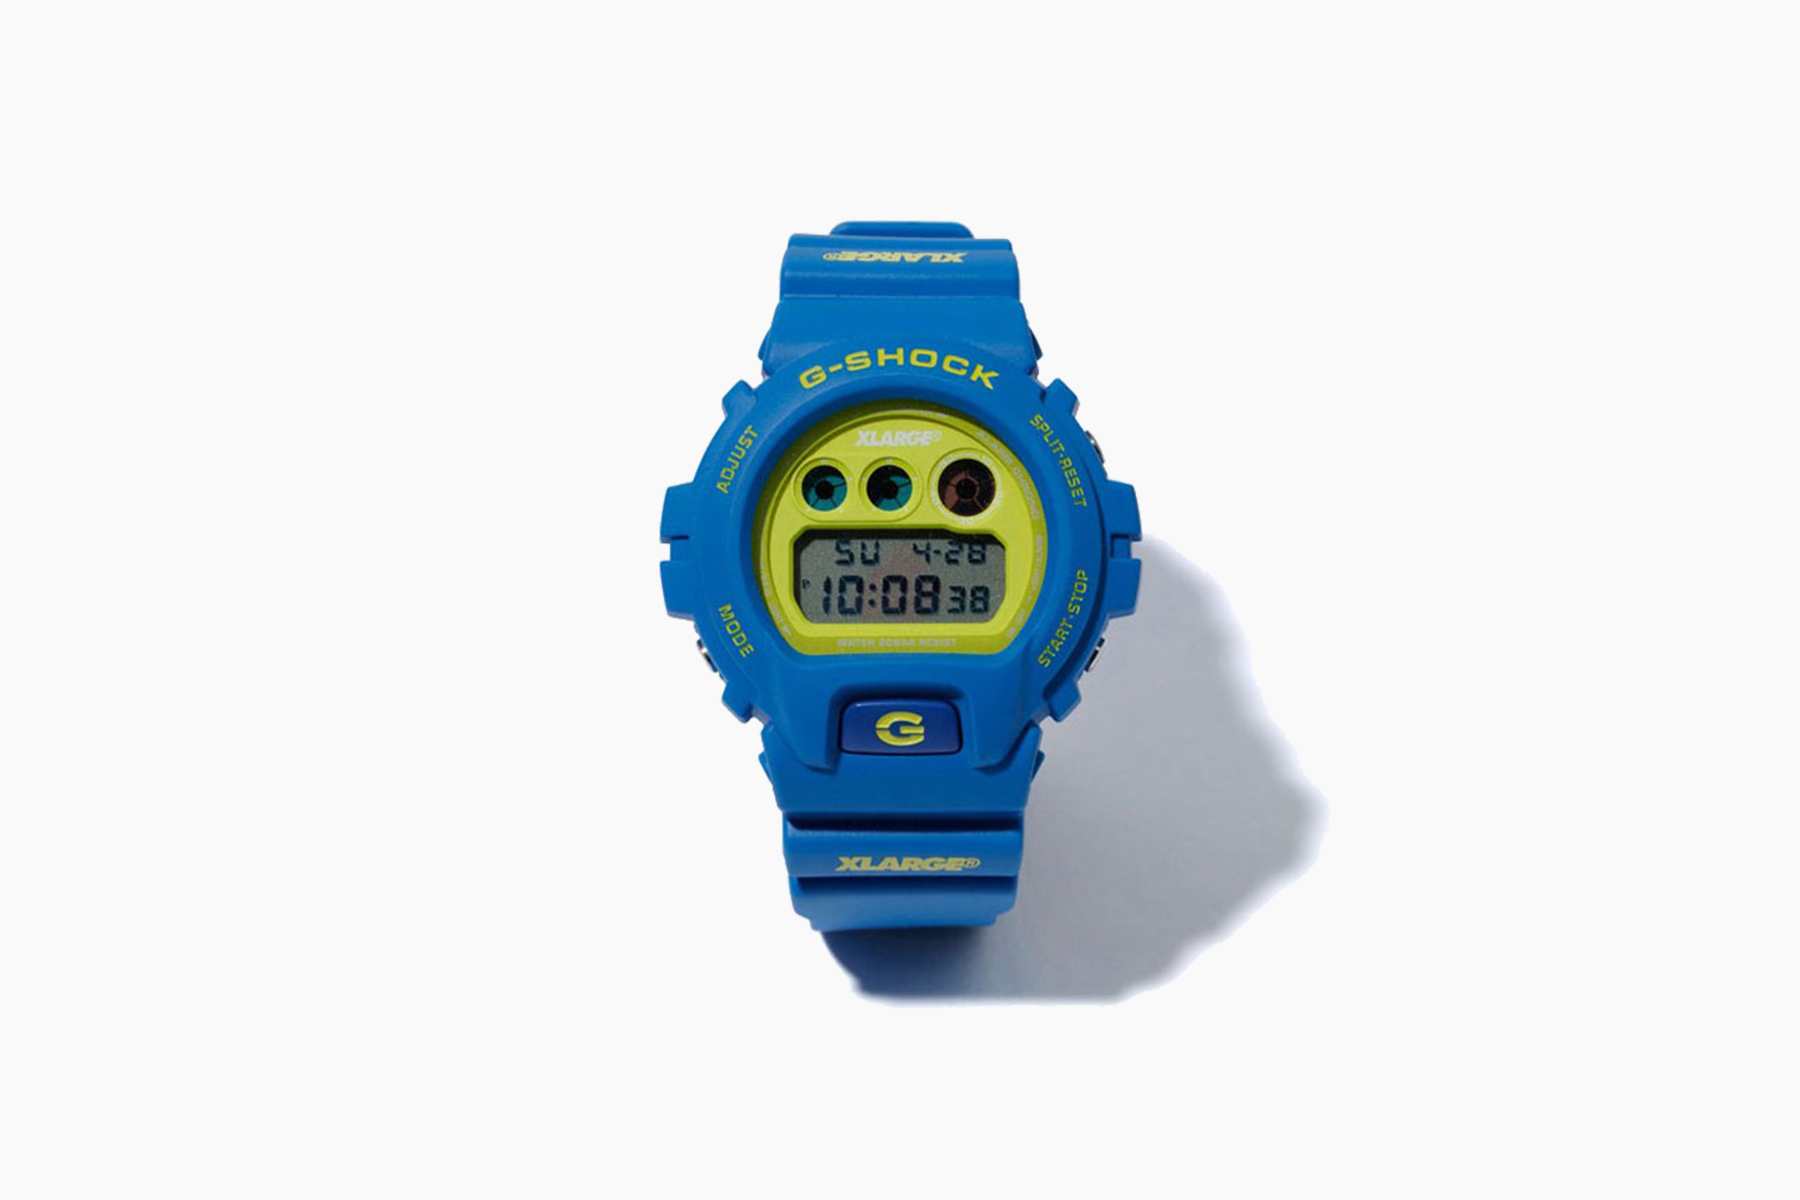 X-LARGE x Casio G-SHOCK DW-6900 Collab Watches | Hypebeast